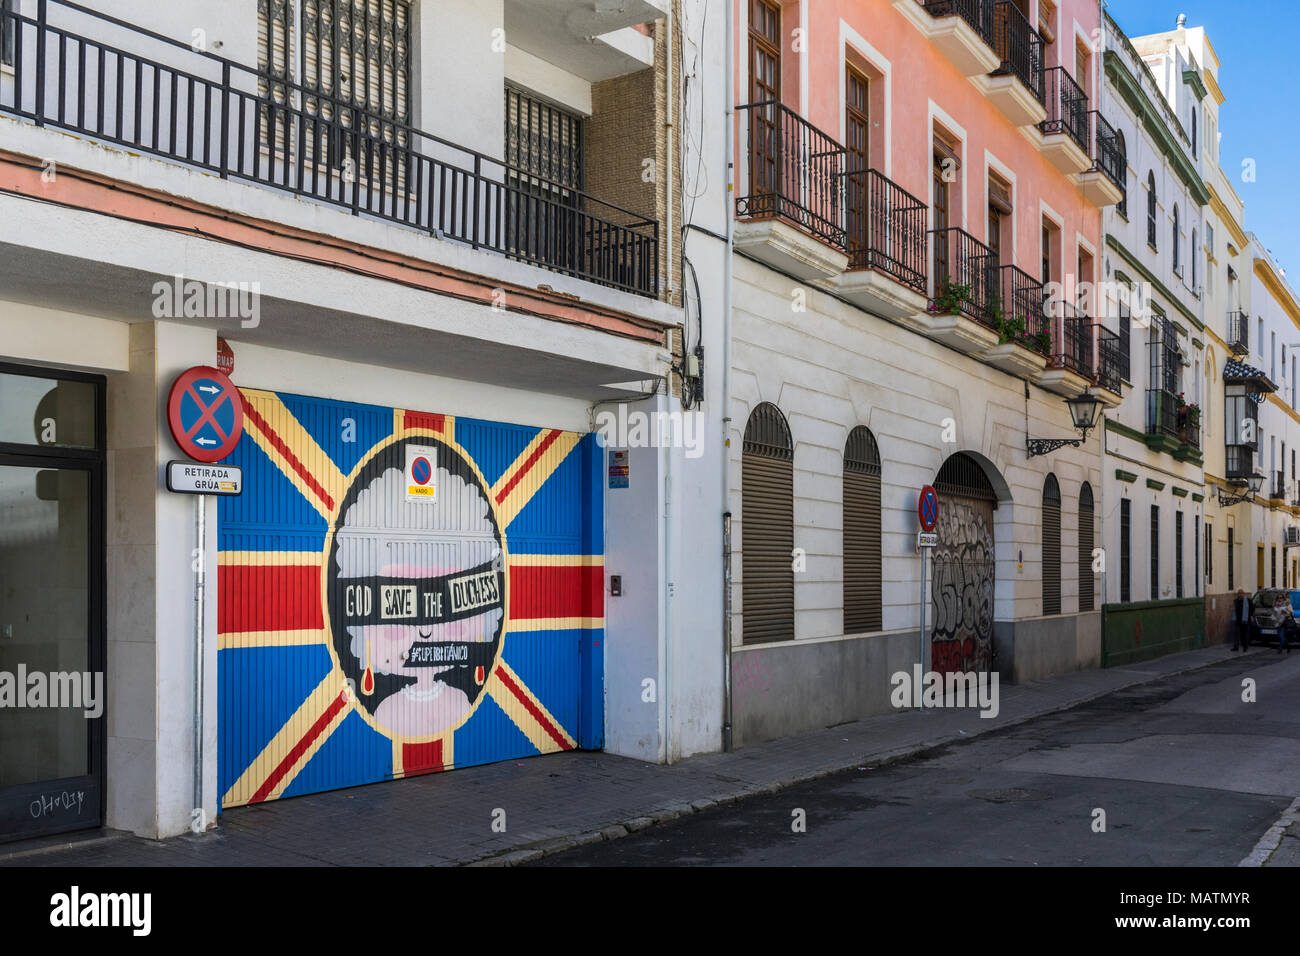 Street scene with Union Jack graffiti in the city centre of the Spanish city Seville, Andalusia, Spain Stock Photo